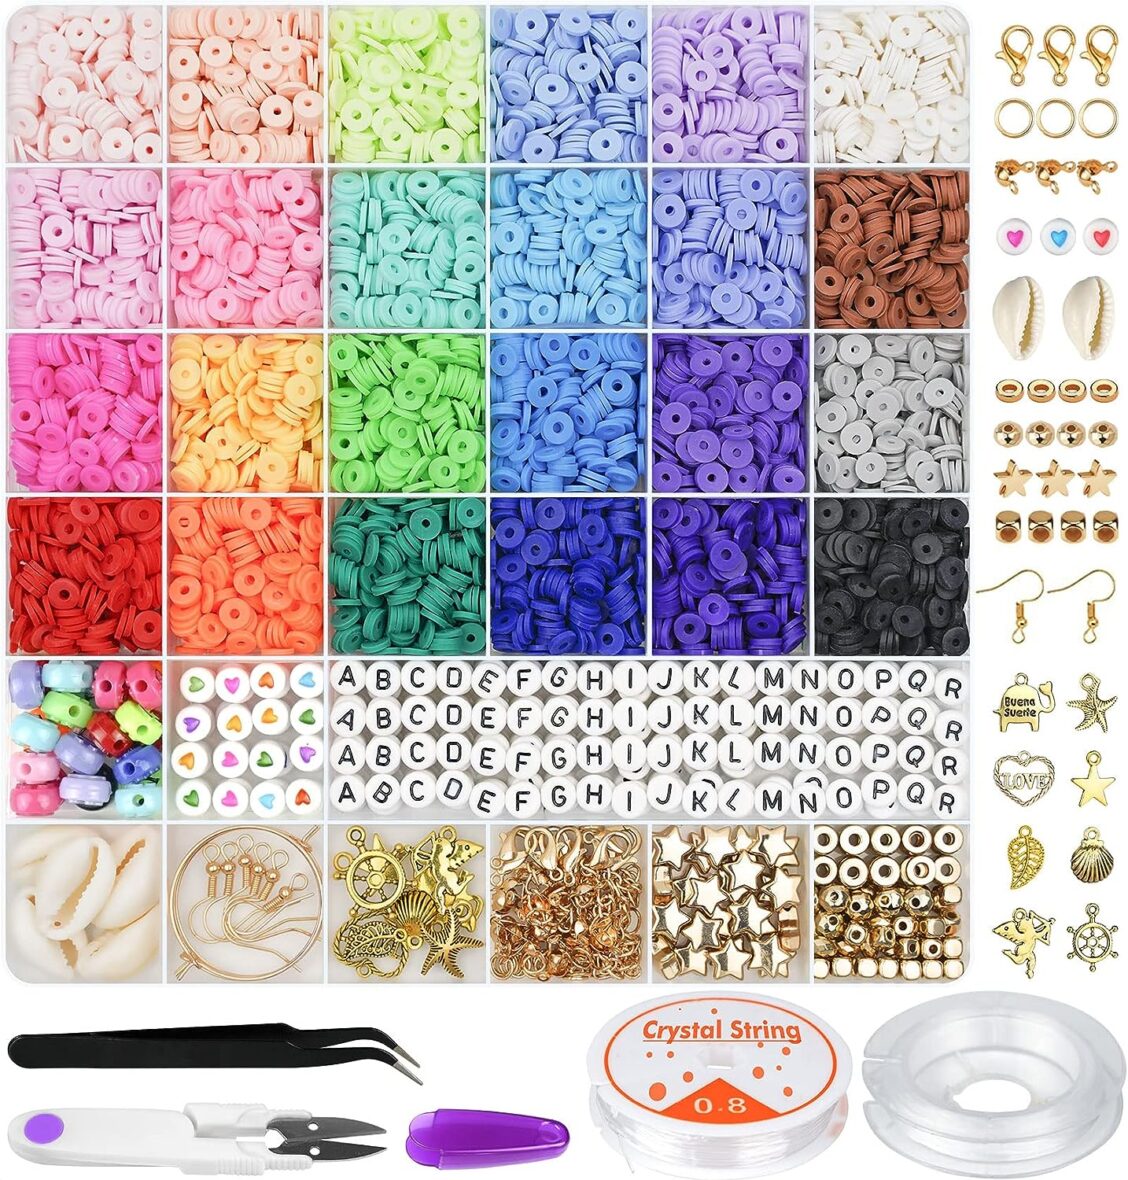 6000 Pcs Clay Beads for Bracelet Making, 24 Colors Flat Preppy Beads for Friendship Bracelet Kit, Polymer Clay Heishi Beads with Charms for Jewelry Making, Crafts Gifts for Teen Girls